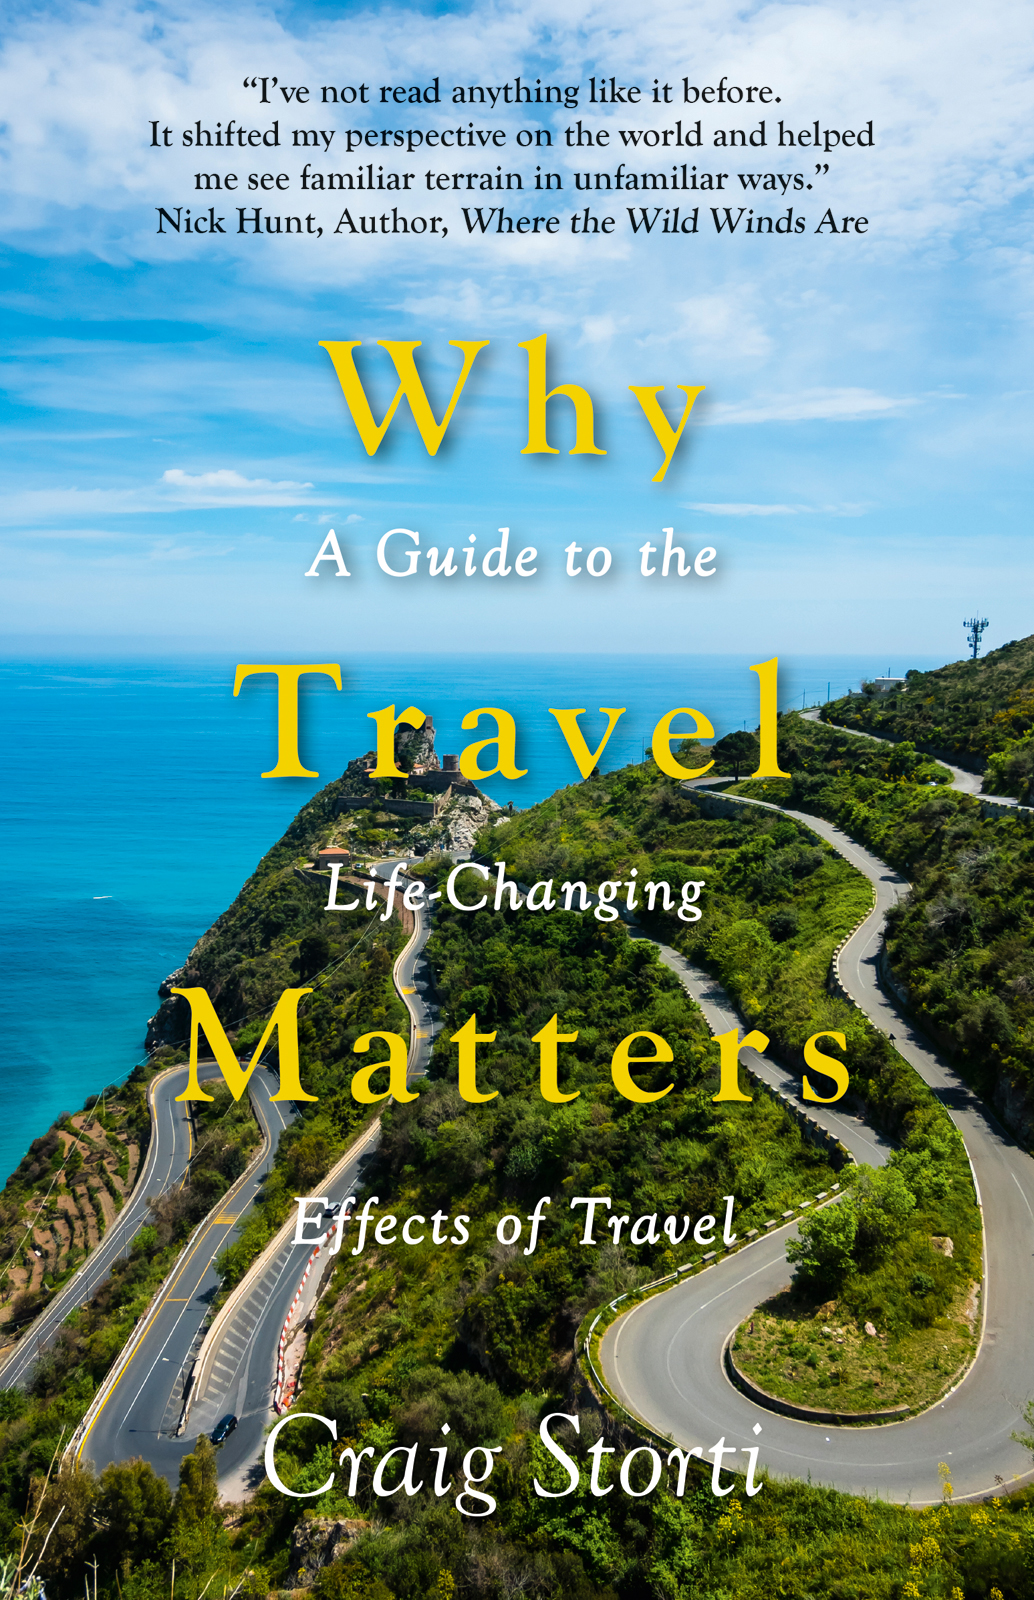 Why Travel Matters by Craig Storti